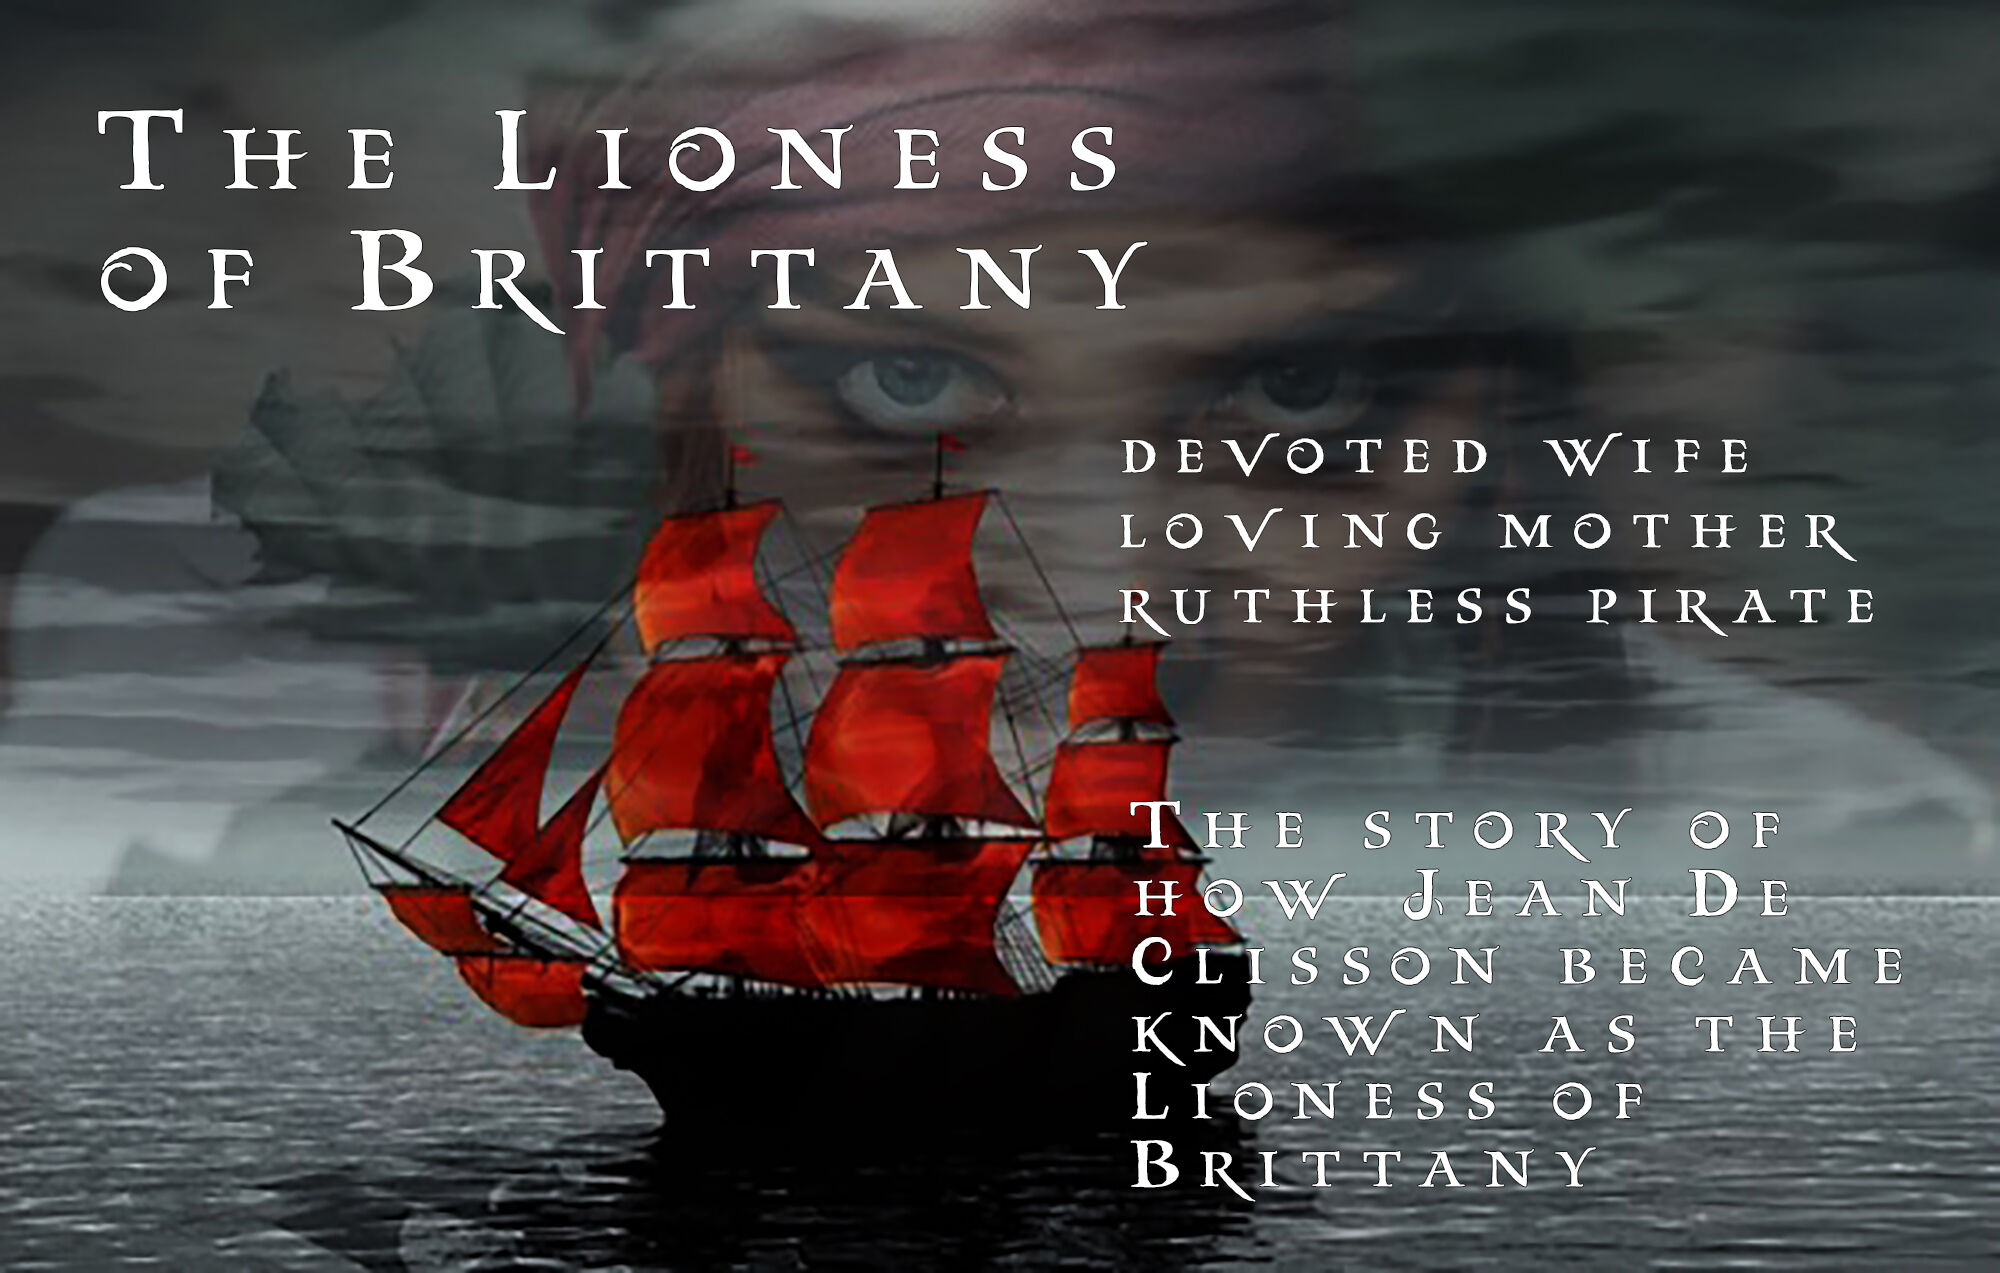 THE LIONESS OF BRITTANY